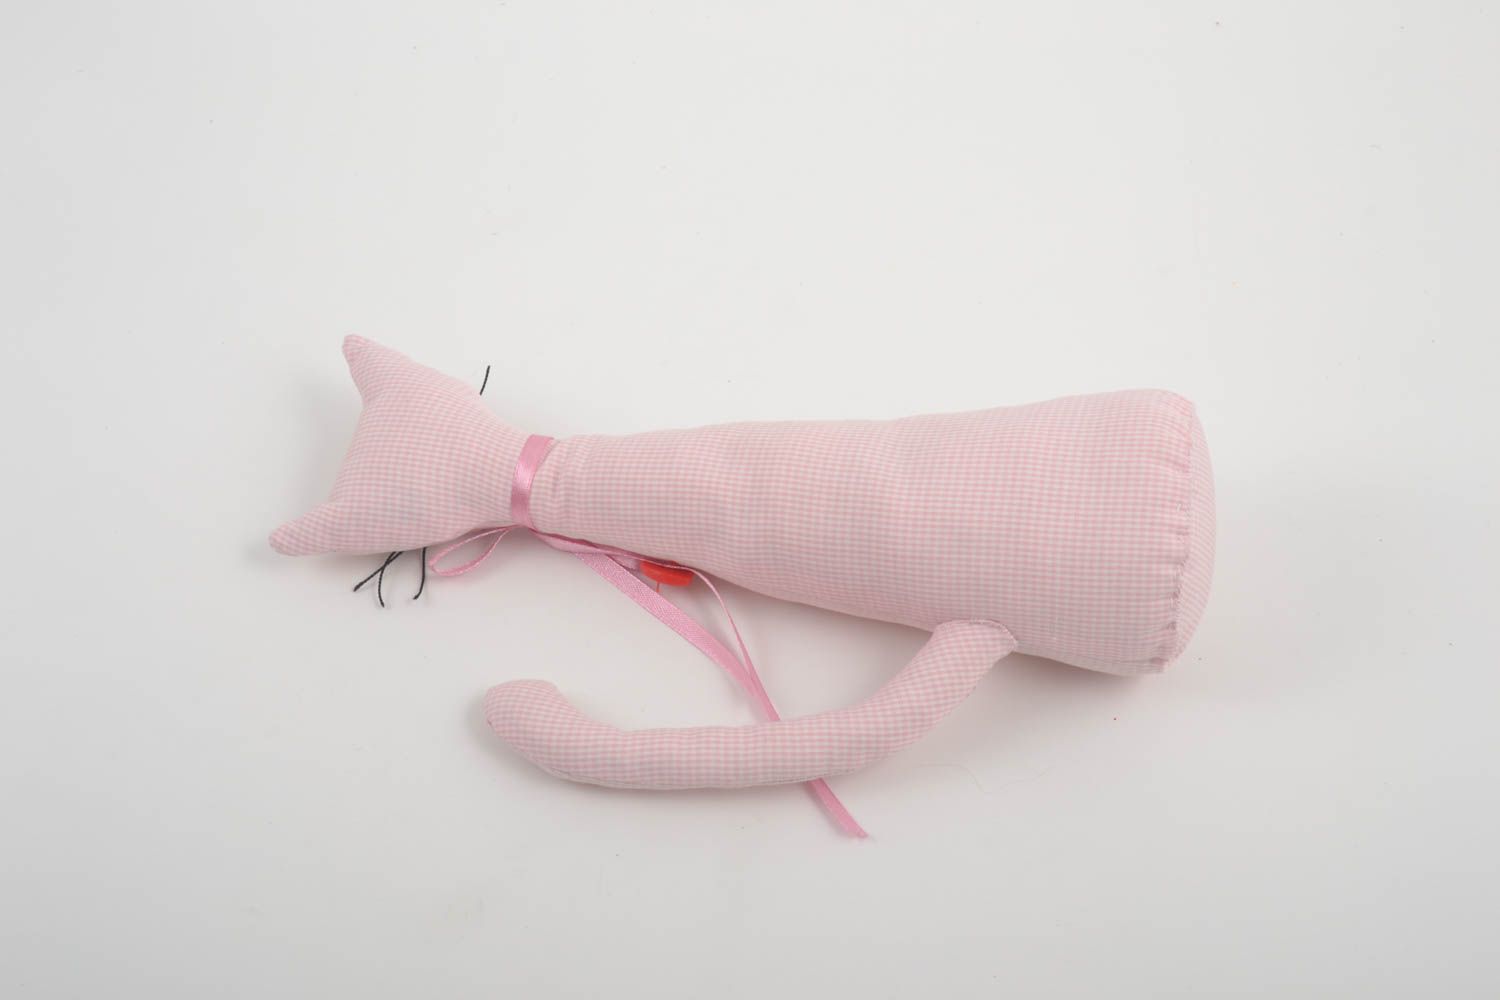 Beautiful handmade soft toy stuffed fabric toy best toys for kids gift ideas photo 3